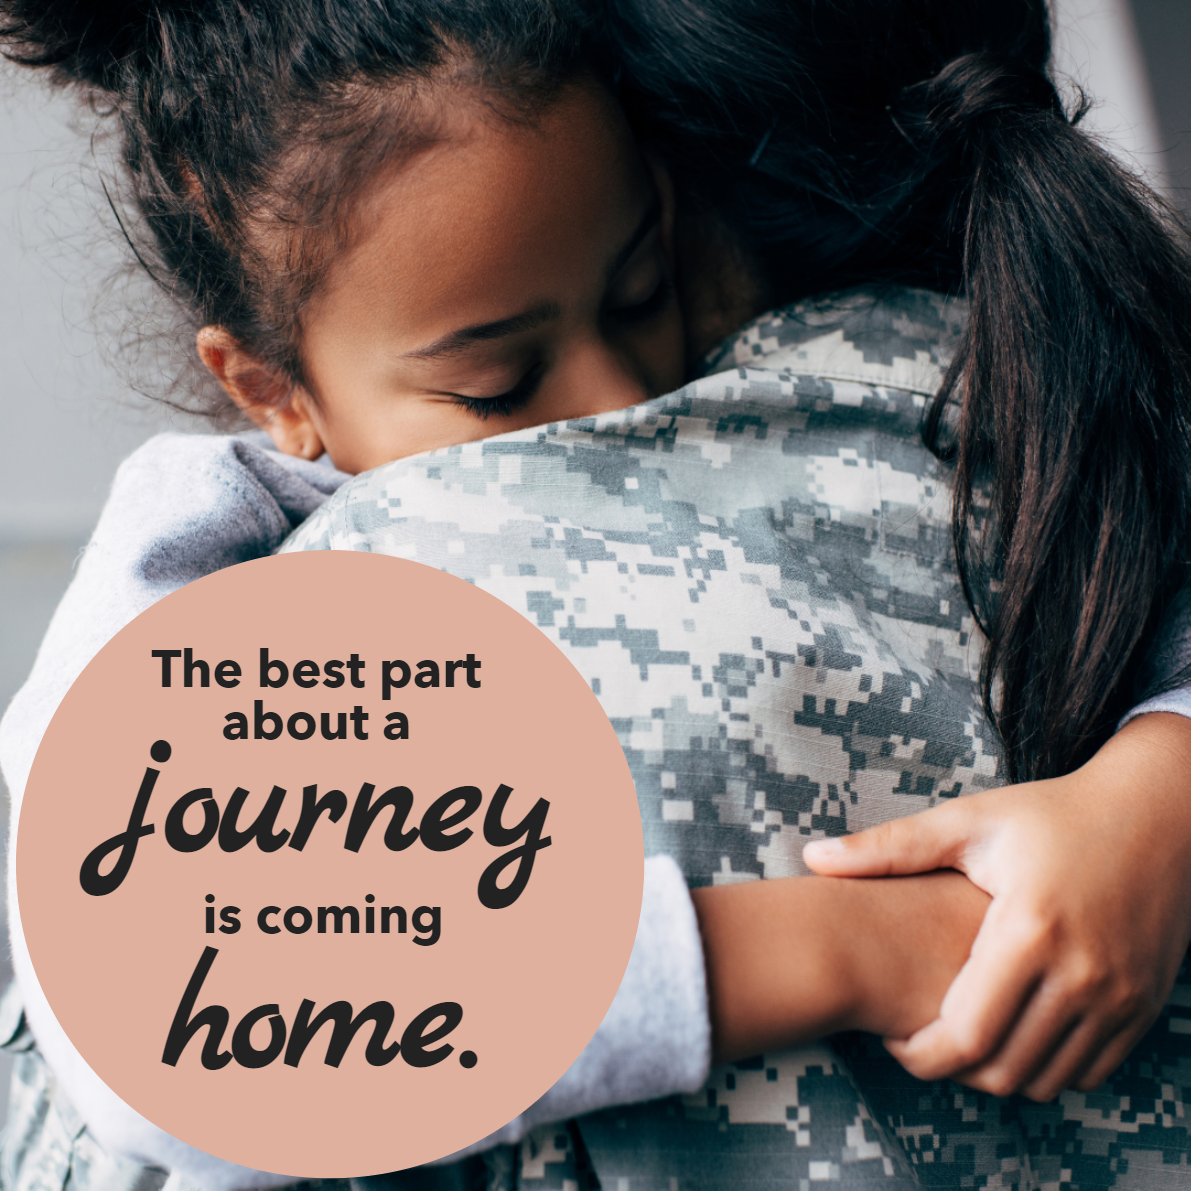 What do you feel when you come home after a long day? ☮️

#cominghome #journey #home 
 #peirealestate #Chrisweir #pei #mrrealestatepei #realtorpei #summersiderealestate #NorthernlightsRealty #RealEstatePEI #PEIProperties #IslandLife #PrinceEdwardIslandRealEstate